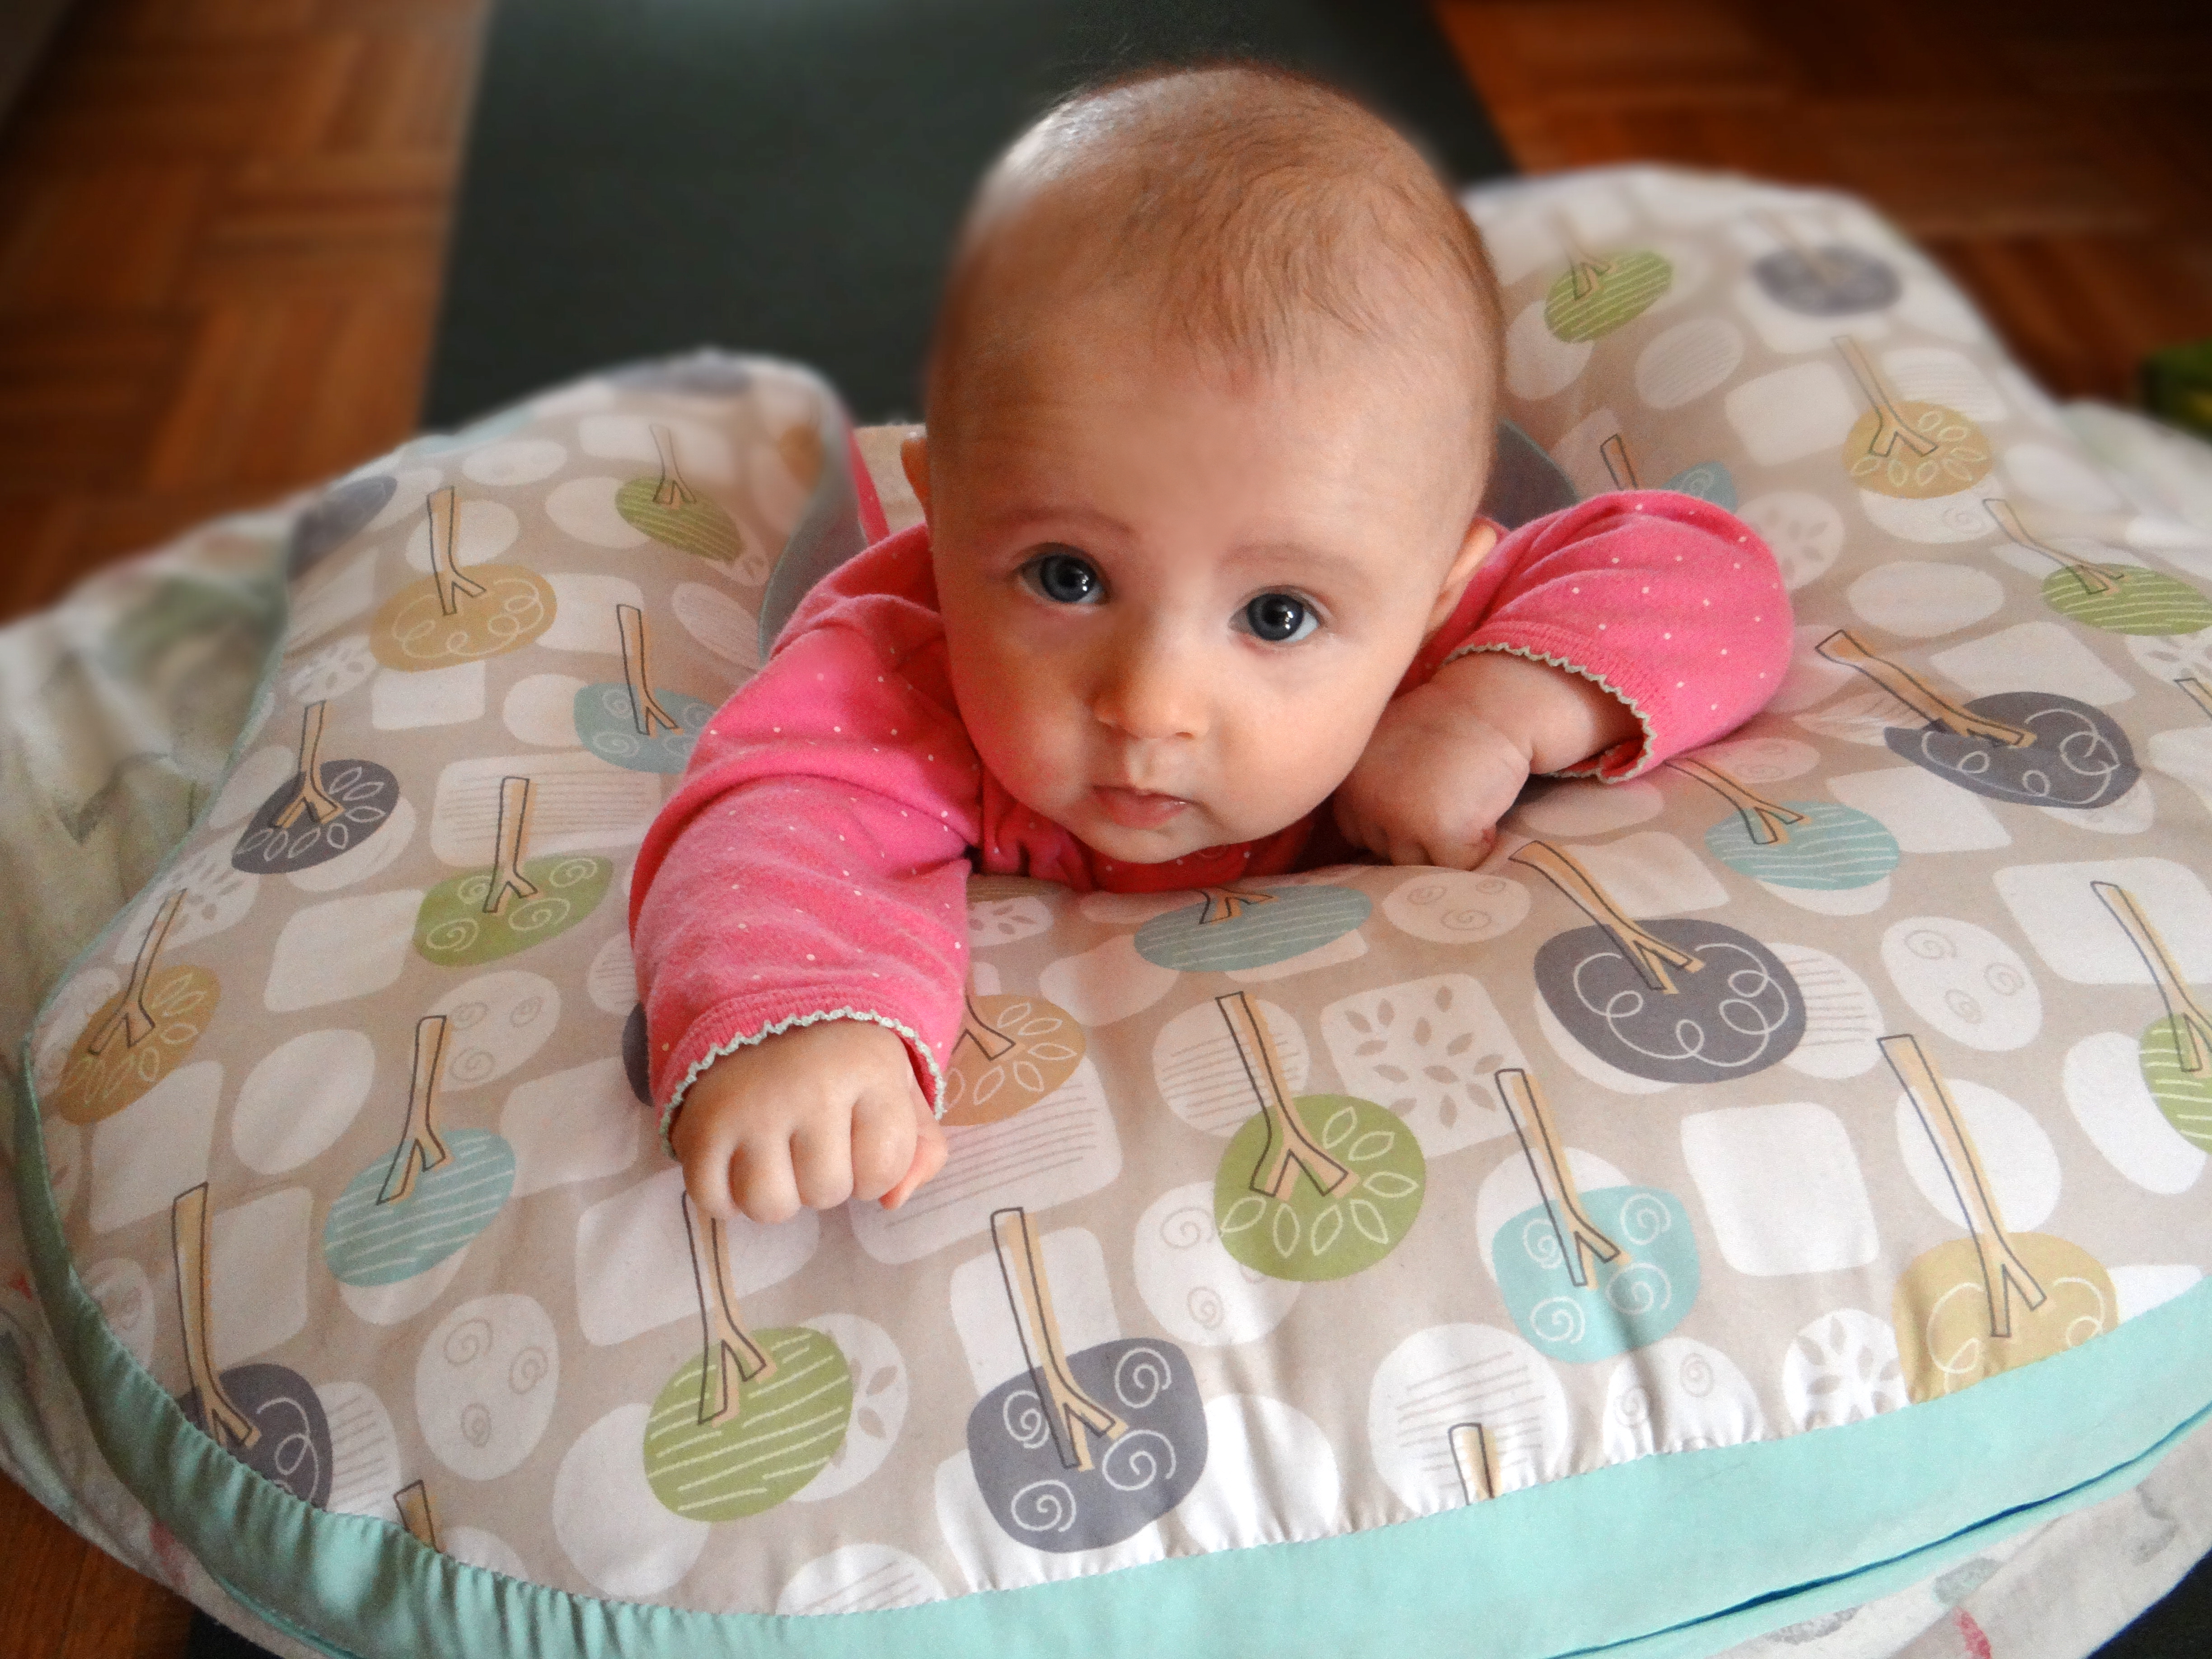 Tummy time with the use of a nursing pillow.